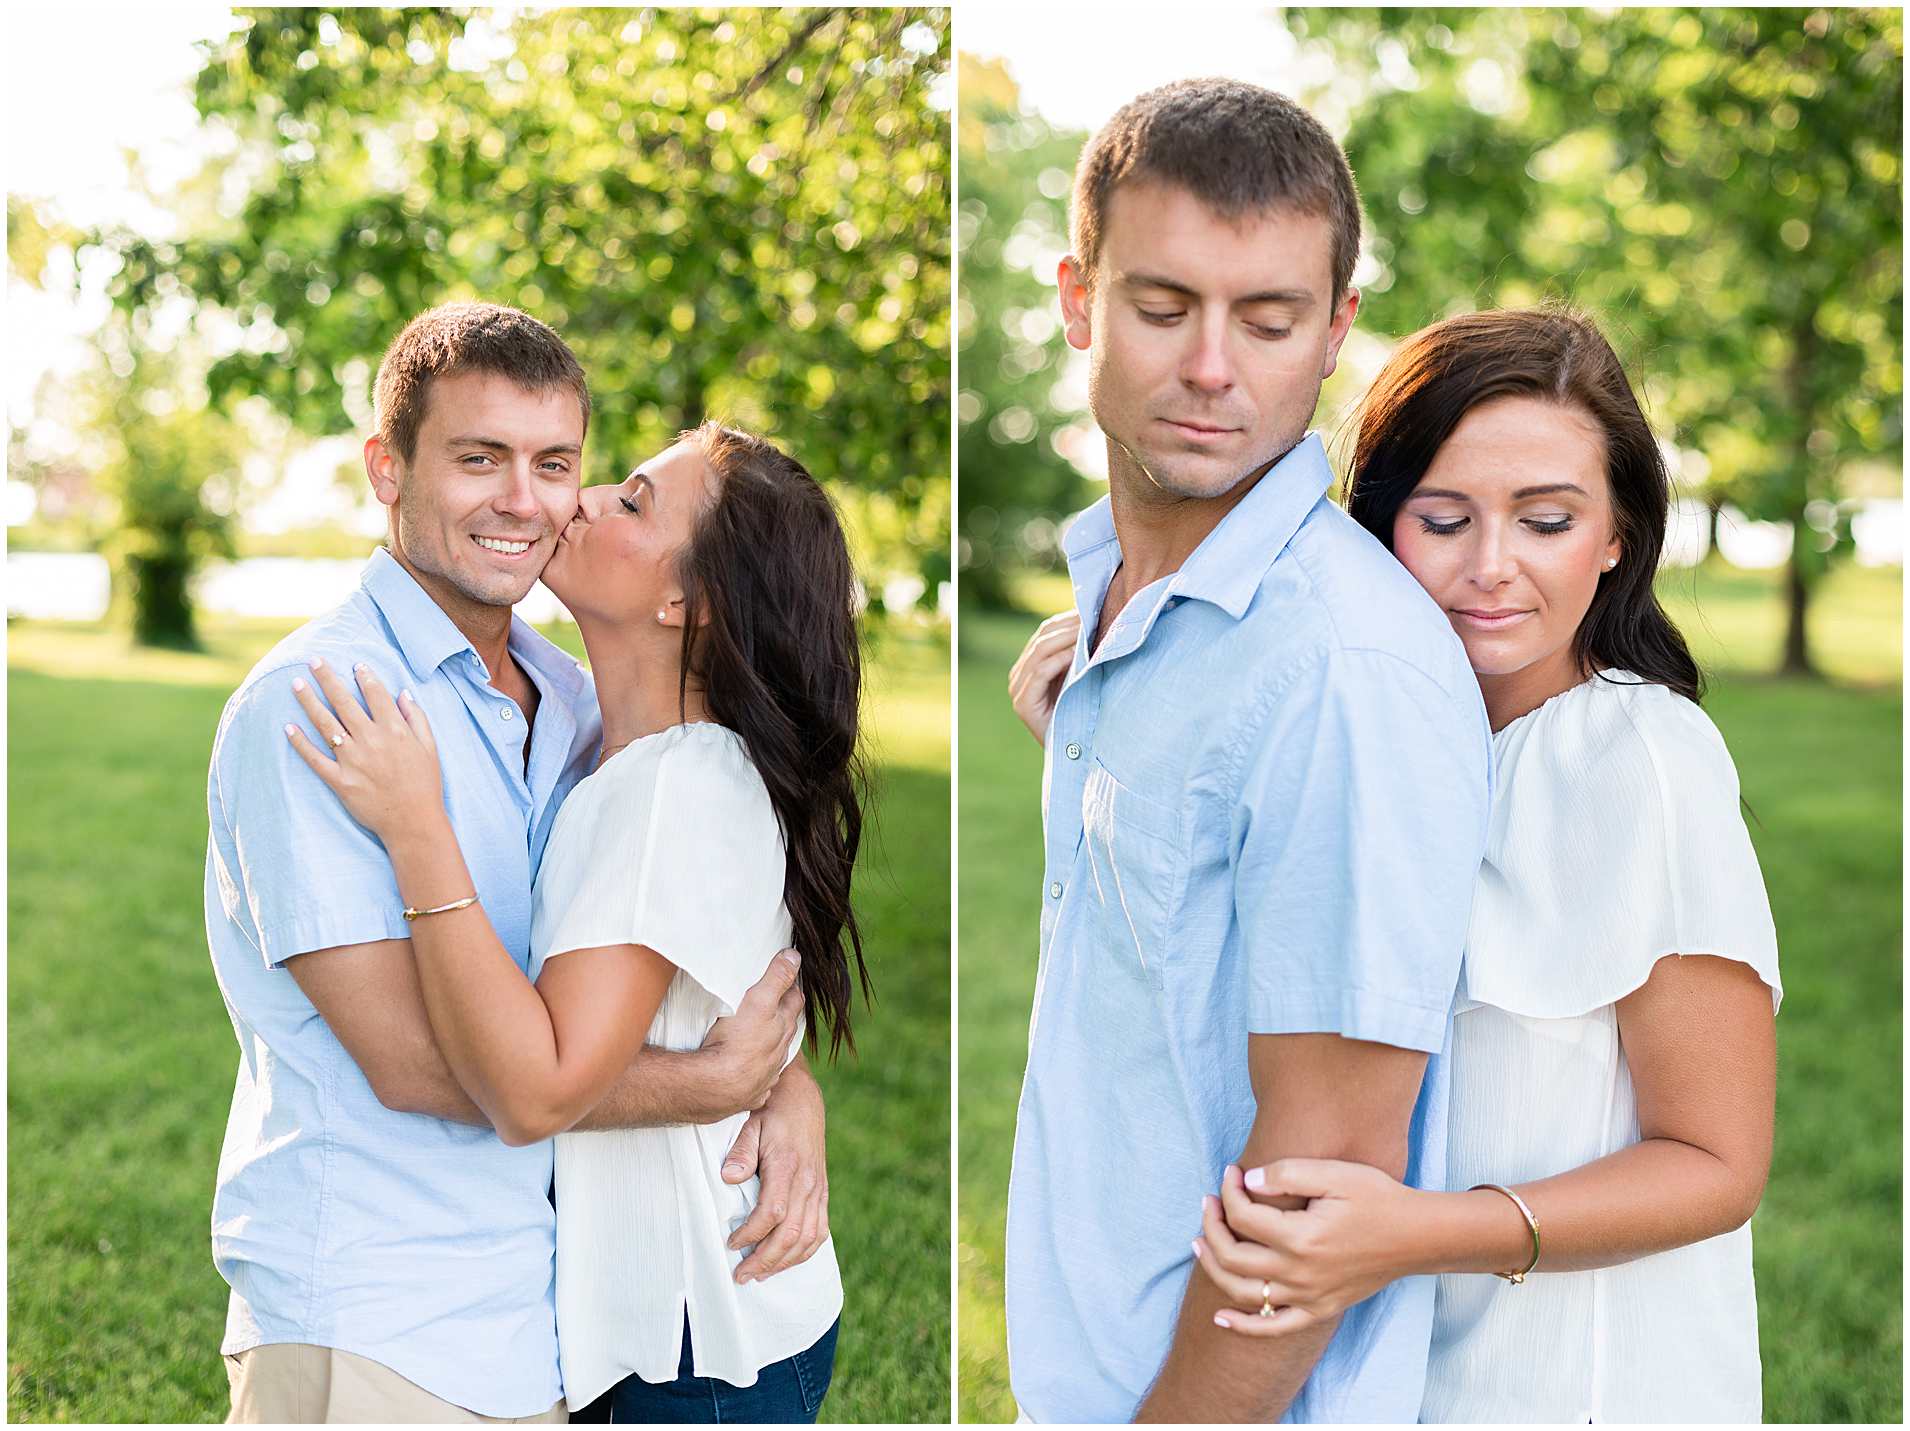 Sunrise Engagement Photos at North Avenue Beach in Summer-Elle Taylor Photography